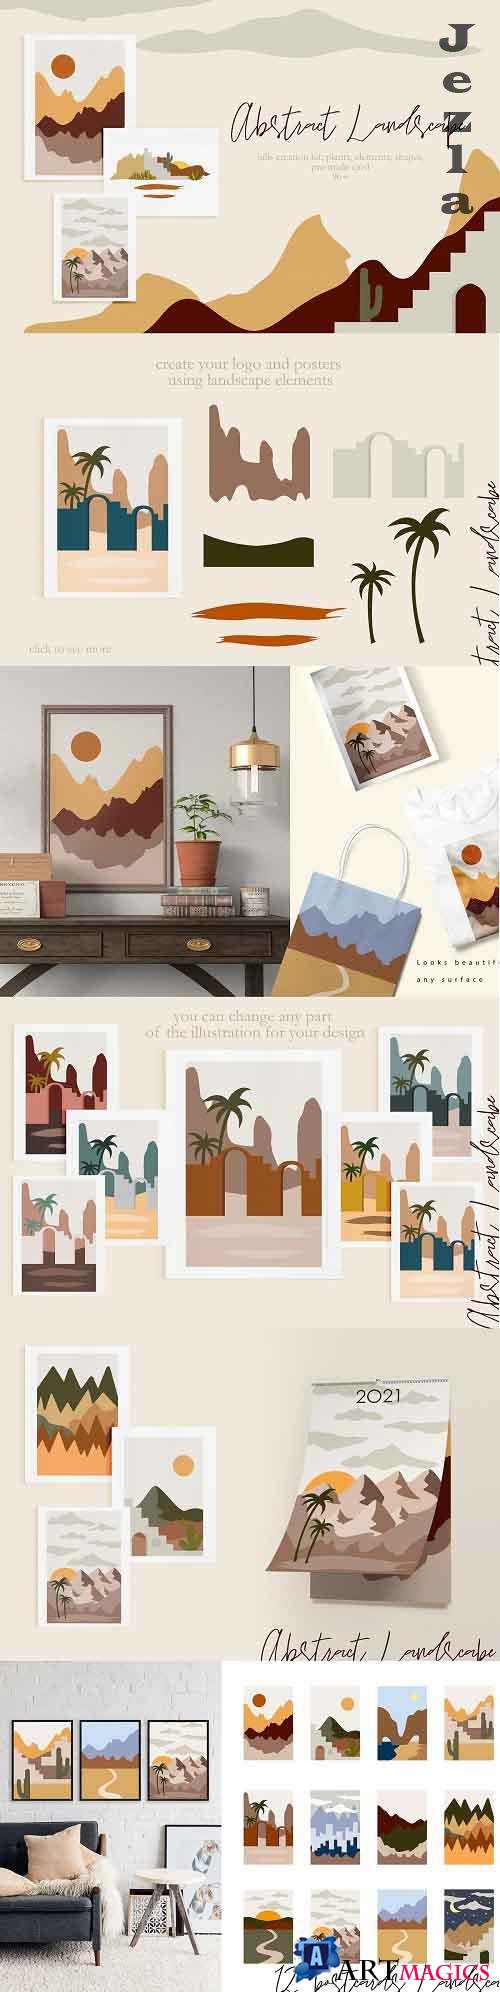 Abstract Landscape Creation Kit - 4557397